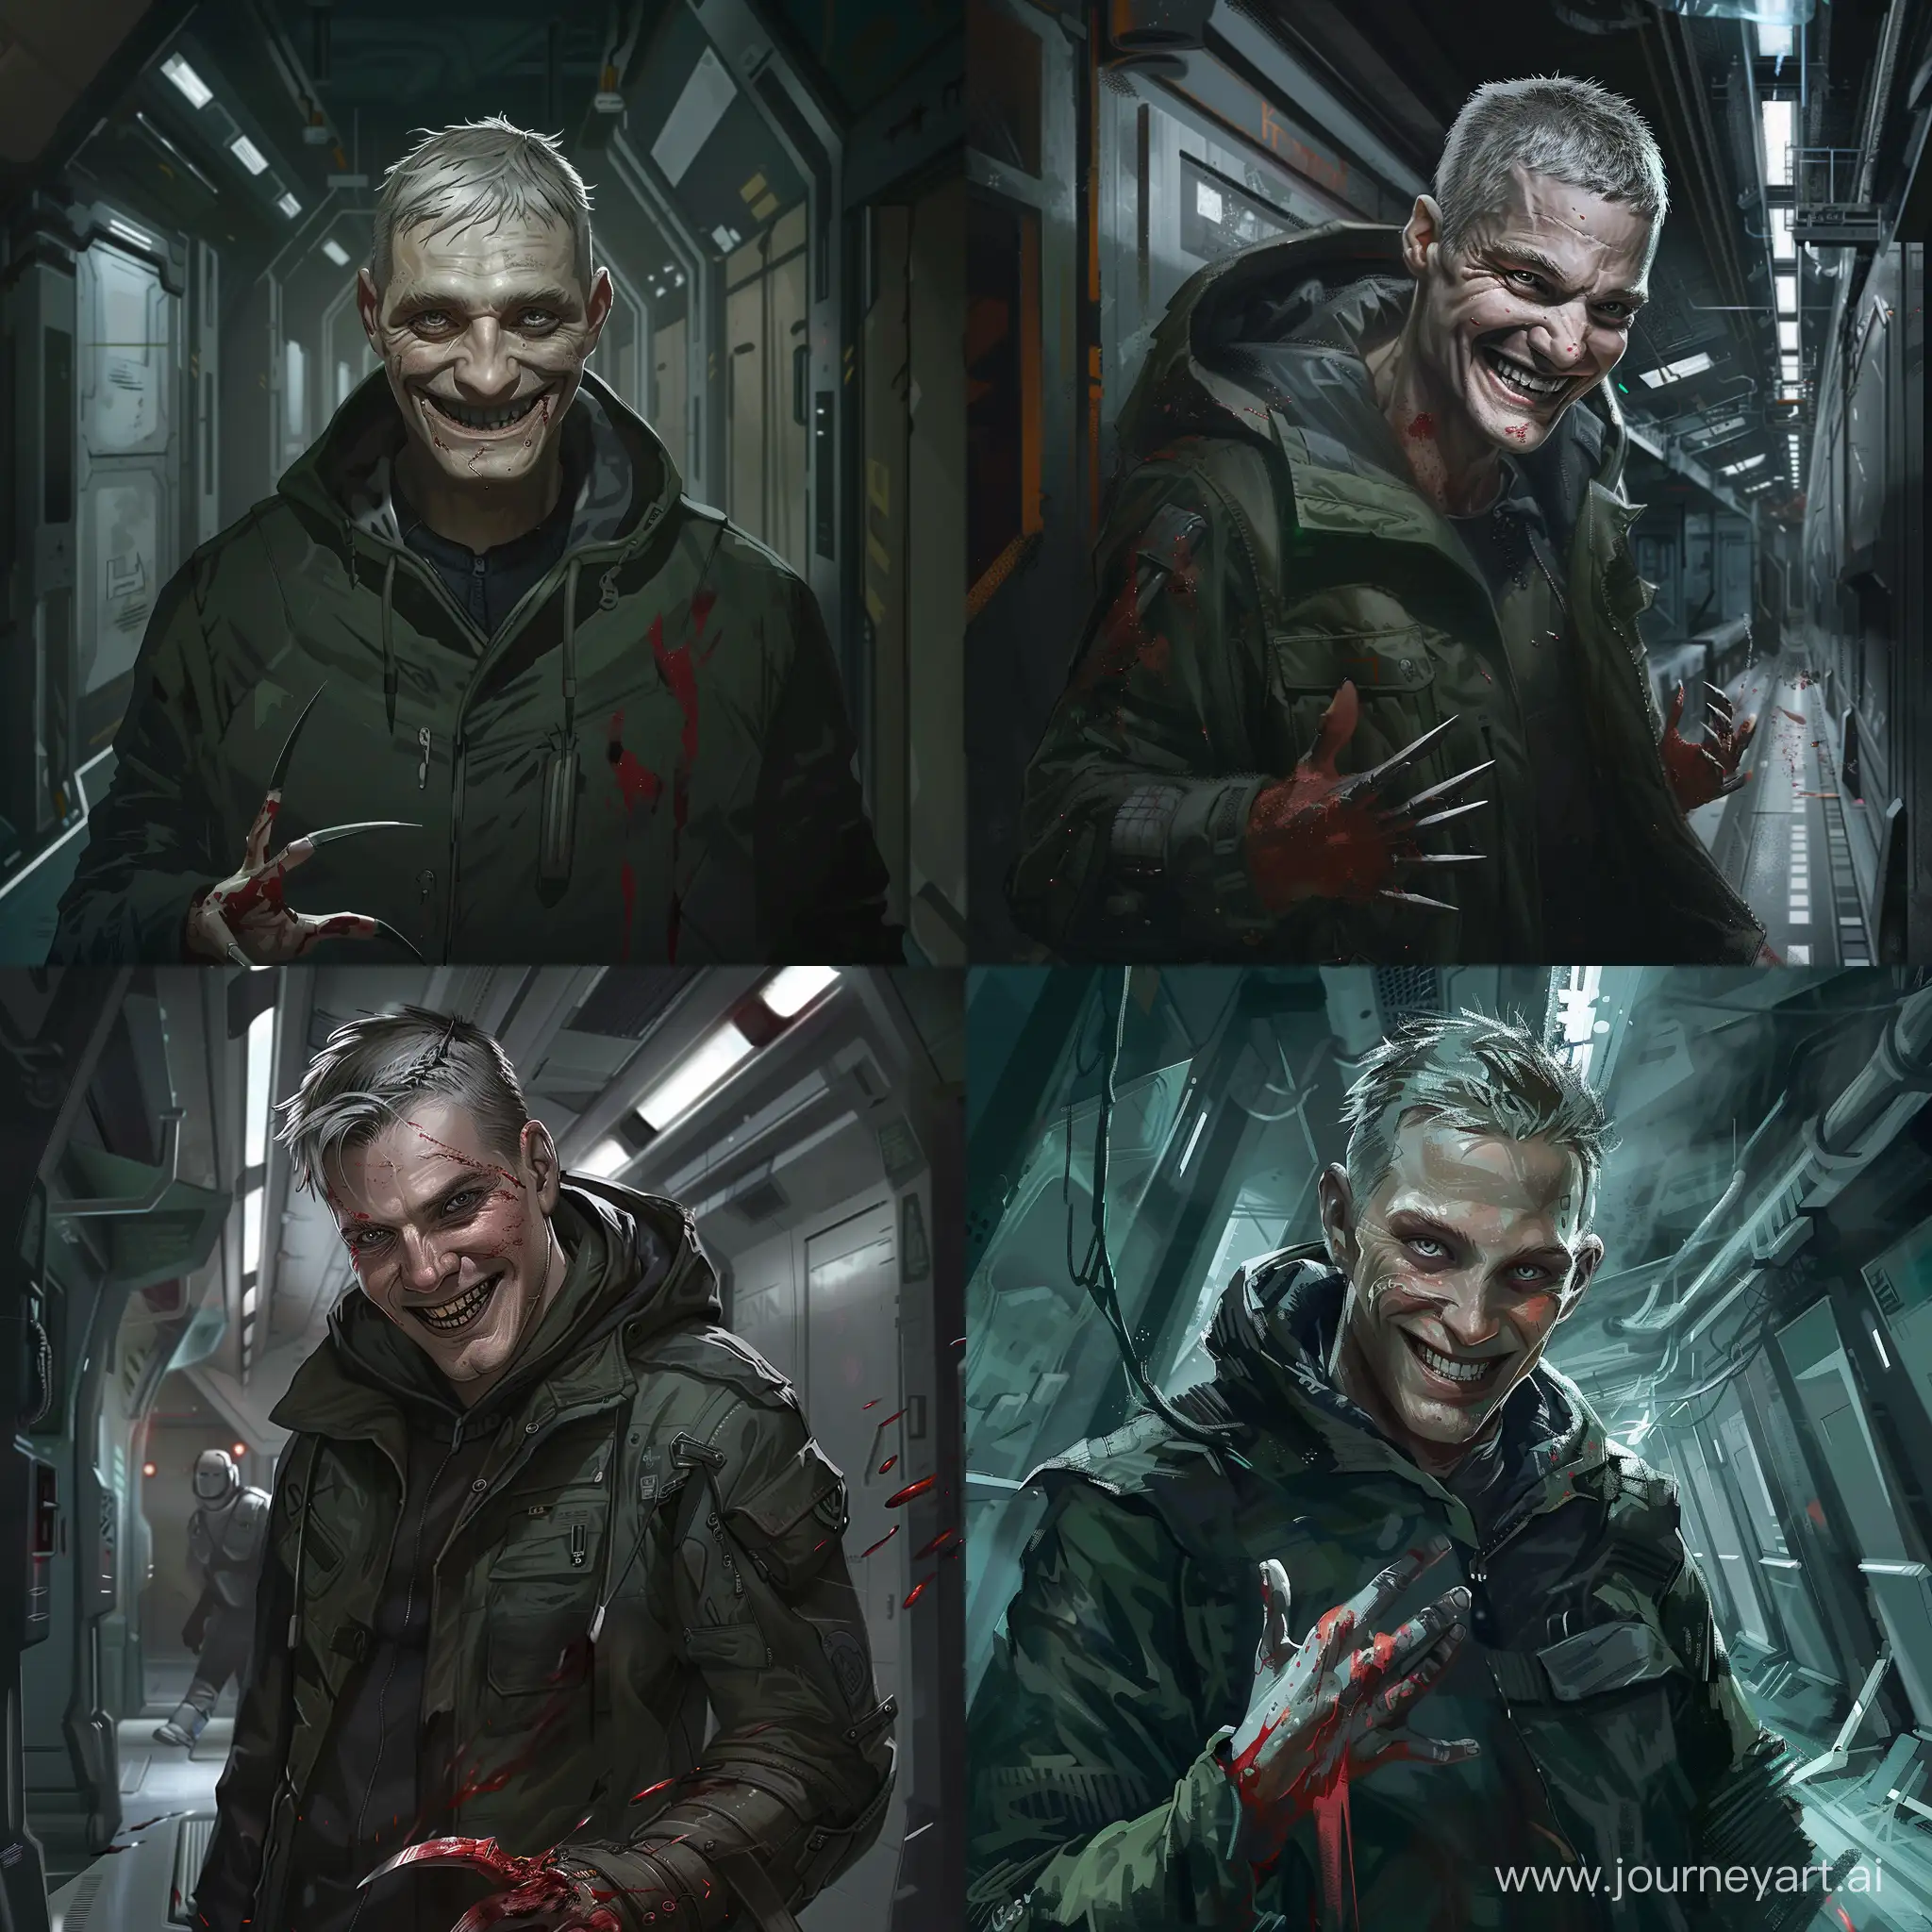 A tall, athletic, gray-skinned man. He has short, blond hair with straight, hanging strands. Grey eyes. He is wearing a dark green jacket with a hood. The hood will cast a shadow on the face. He has a joyful face, he smiles and looks at the viewer. He has sharp teeth. Fingers with thin claws. The man is covered in red liquid. Сorridors of the space station in the background